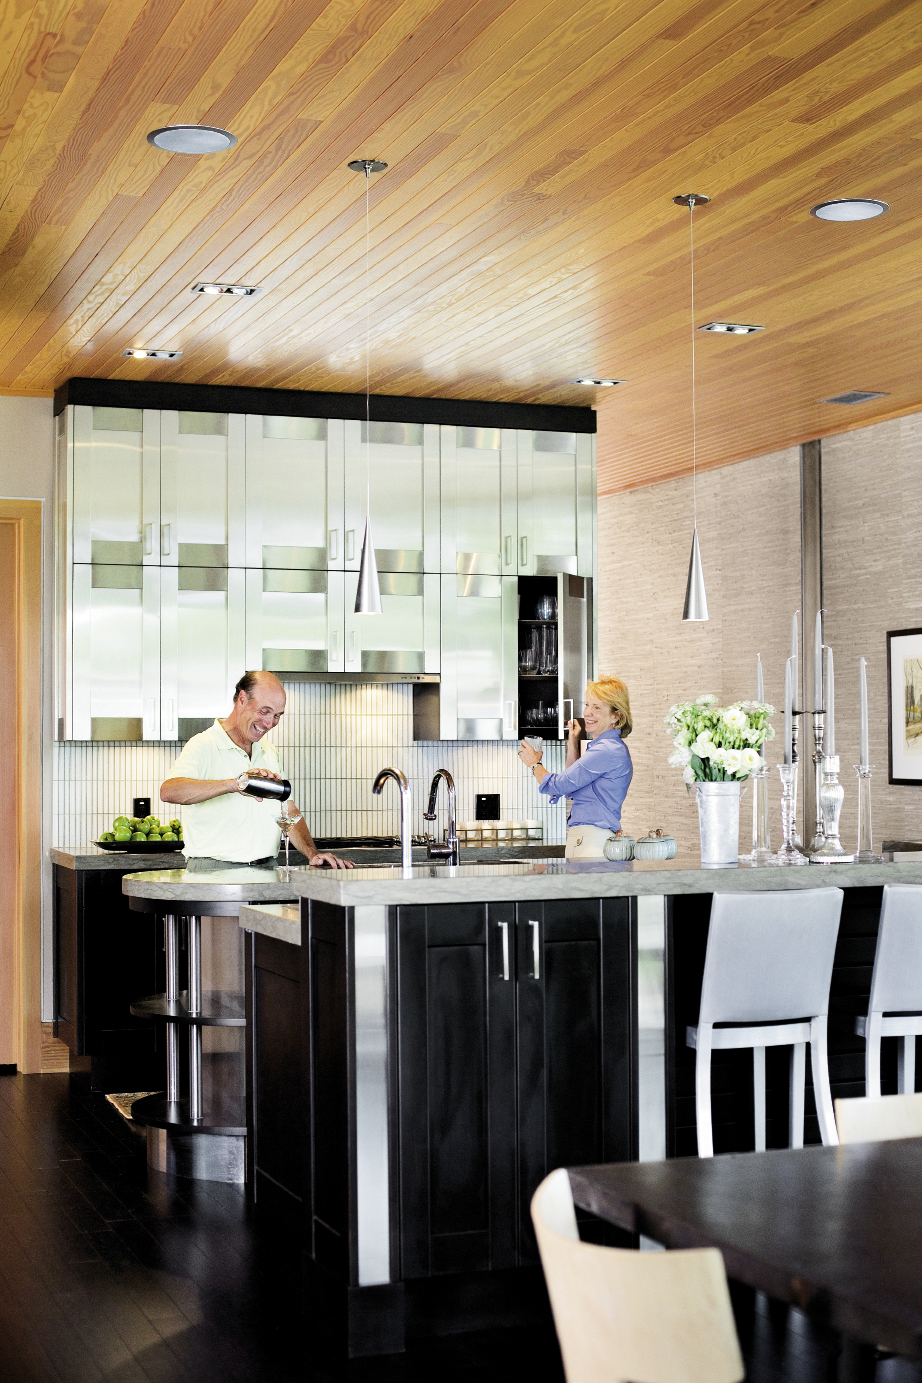 the pair in their open kitchen, anchored by stainless steel upper cabinetry.